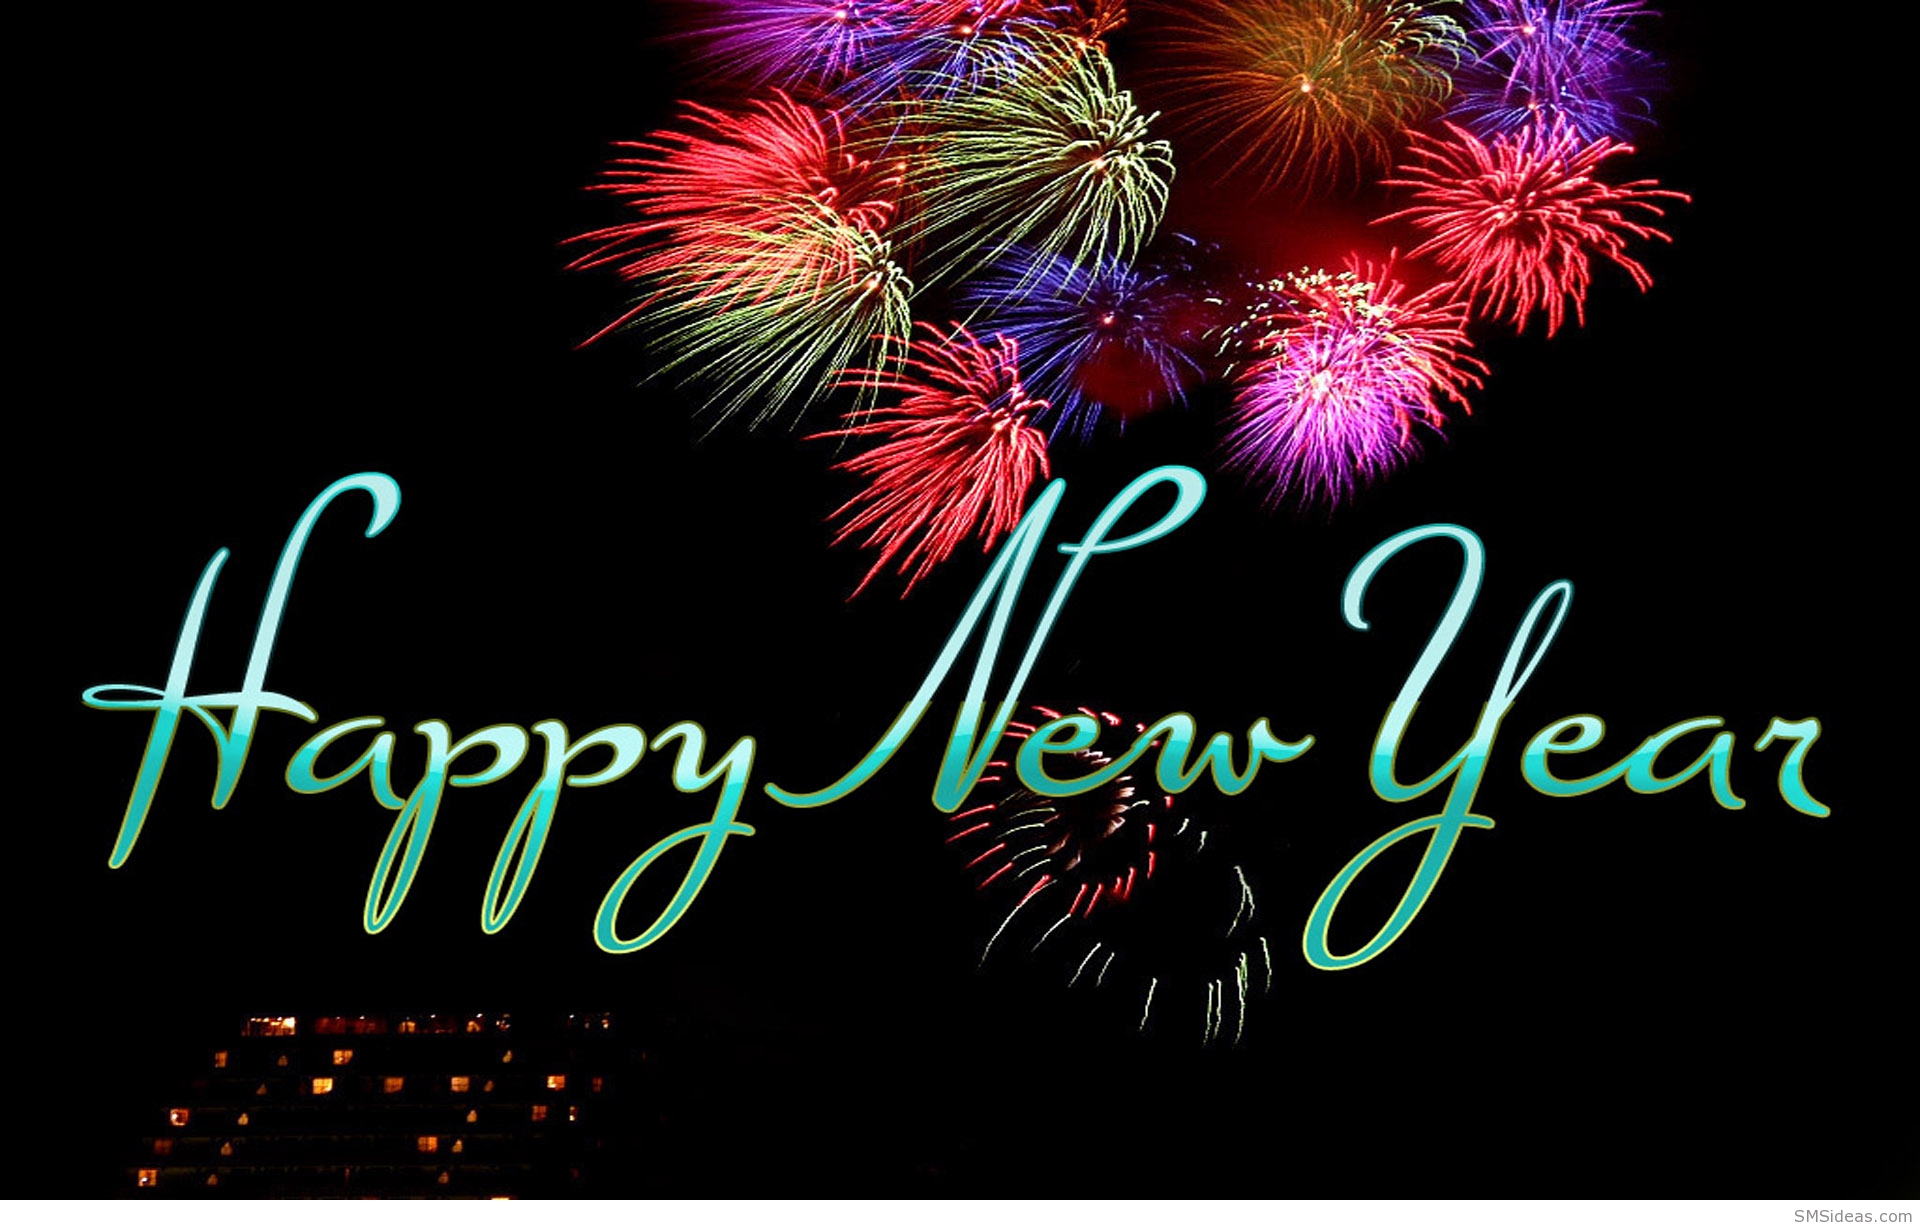 New Year 2016 Backgrounds, Compatible - PC, Mobile, Gadgets| 1920x1225 px